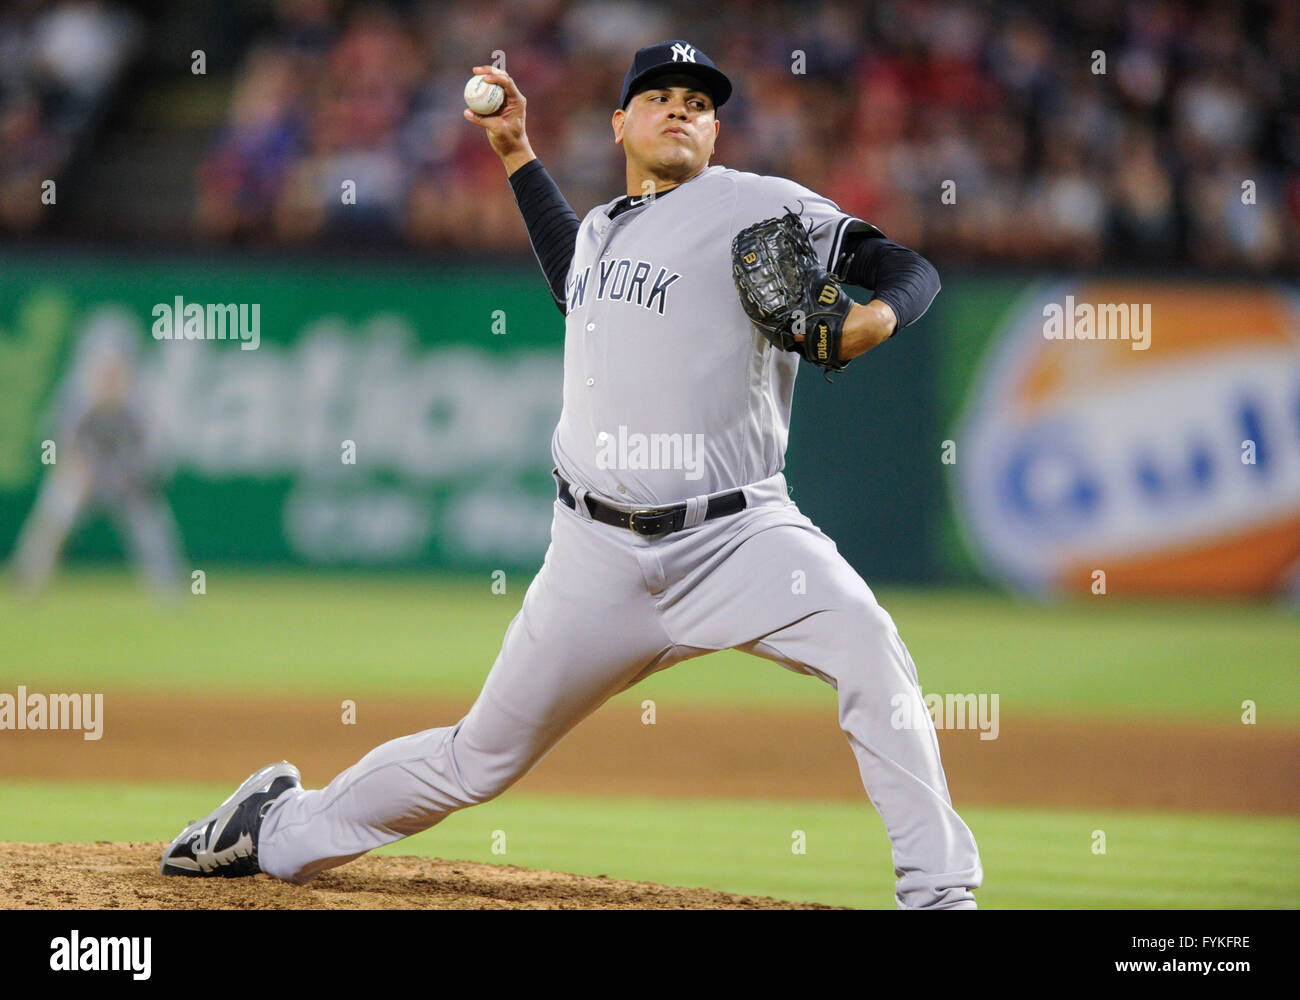 Apr 25, 2016: New York Yankees relief pitcher Dellin Betances #68 during an  MLB game between the New York Yankees and the Texas Rangers at Globe Life  Park in Arlington, TX New